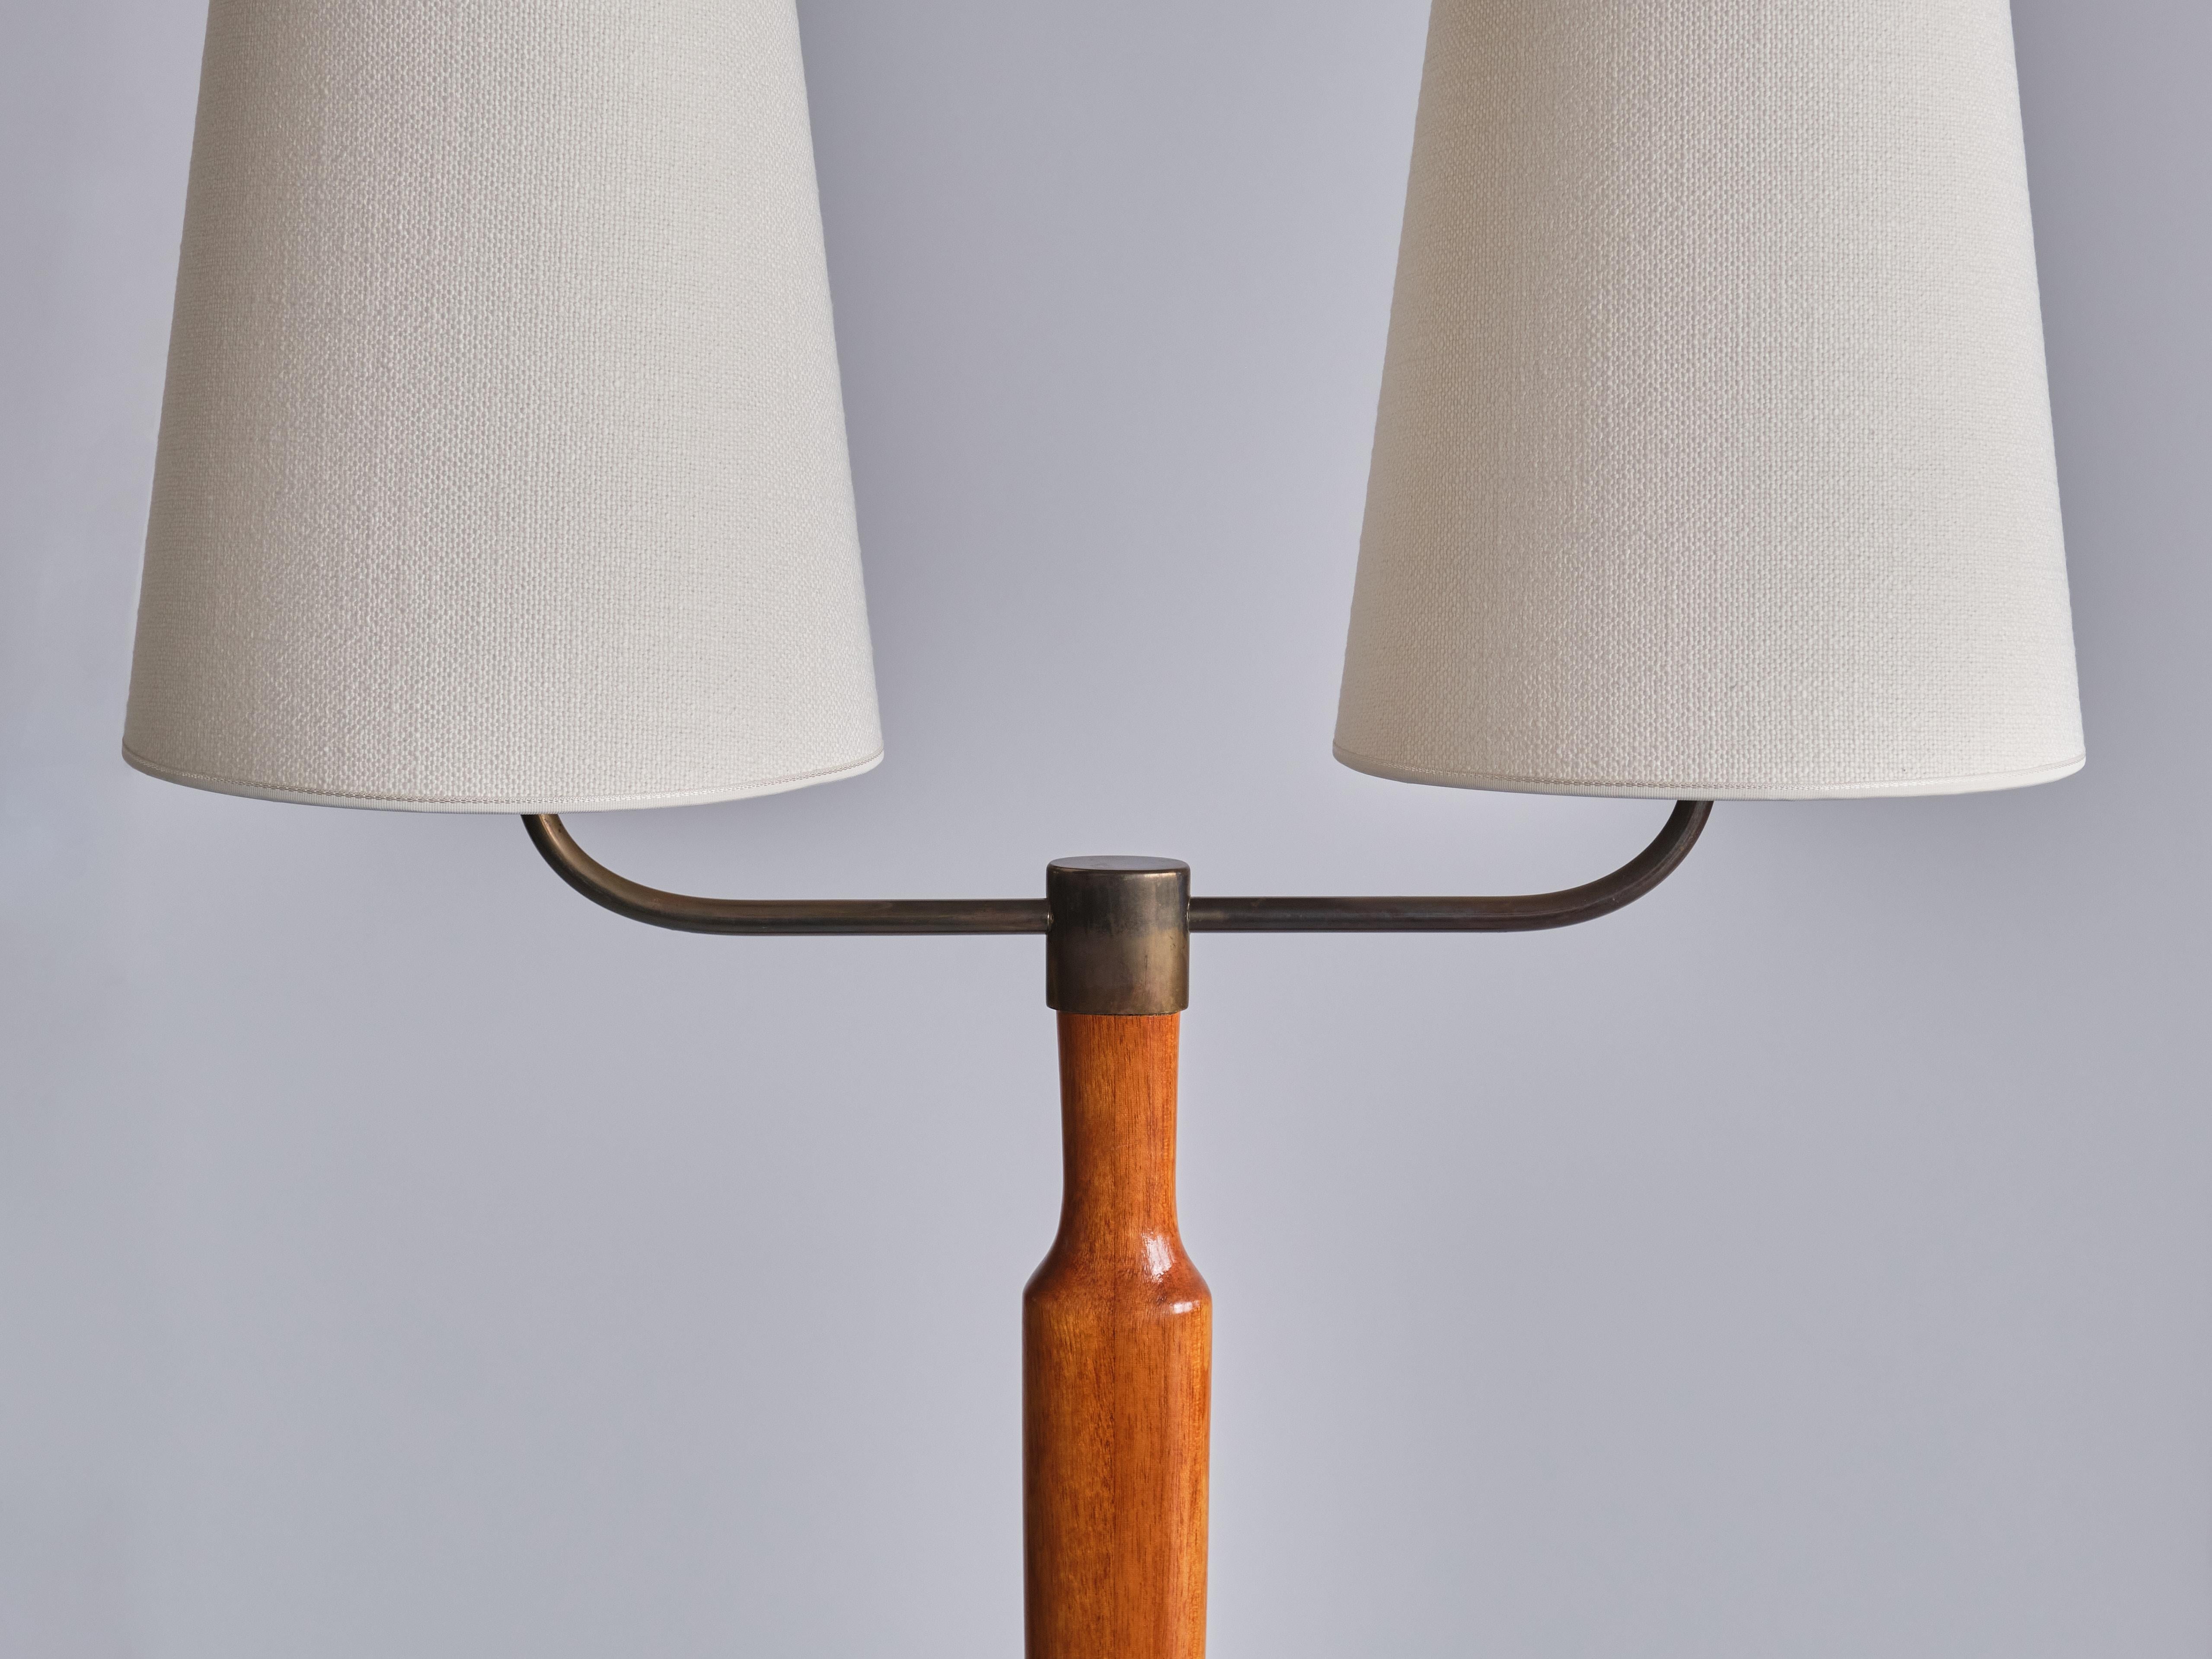 Mid-20th Century Swedish Modern Two Arm Floor Lamp in Teak Wood and Brass, Sweden, Late 1940s